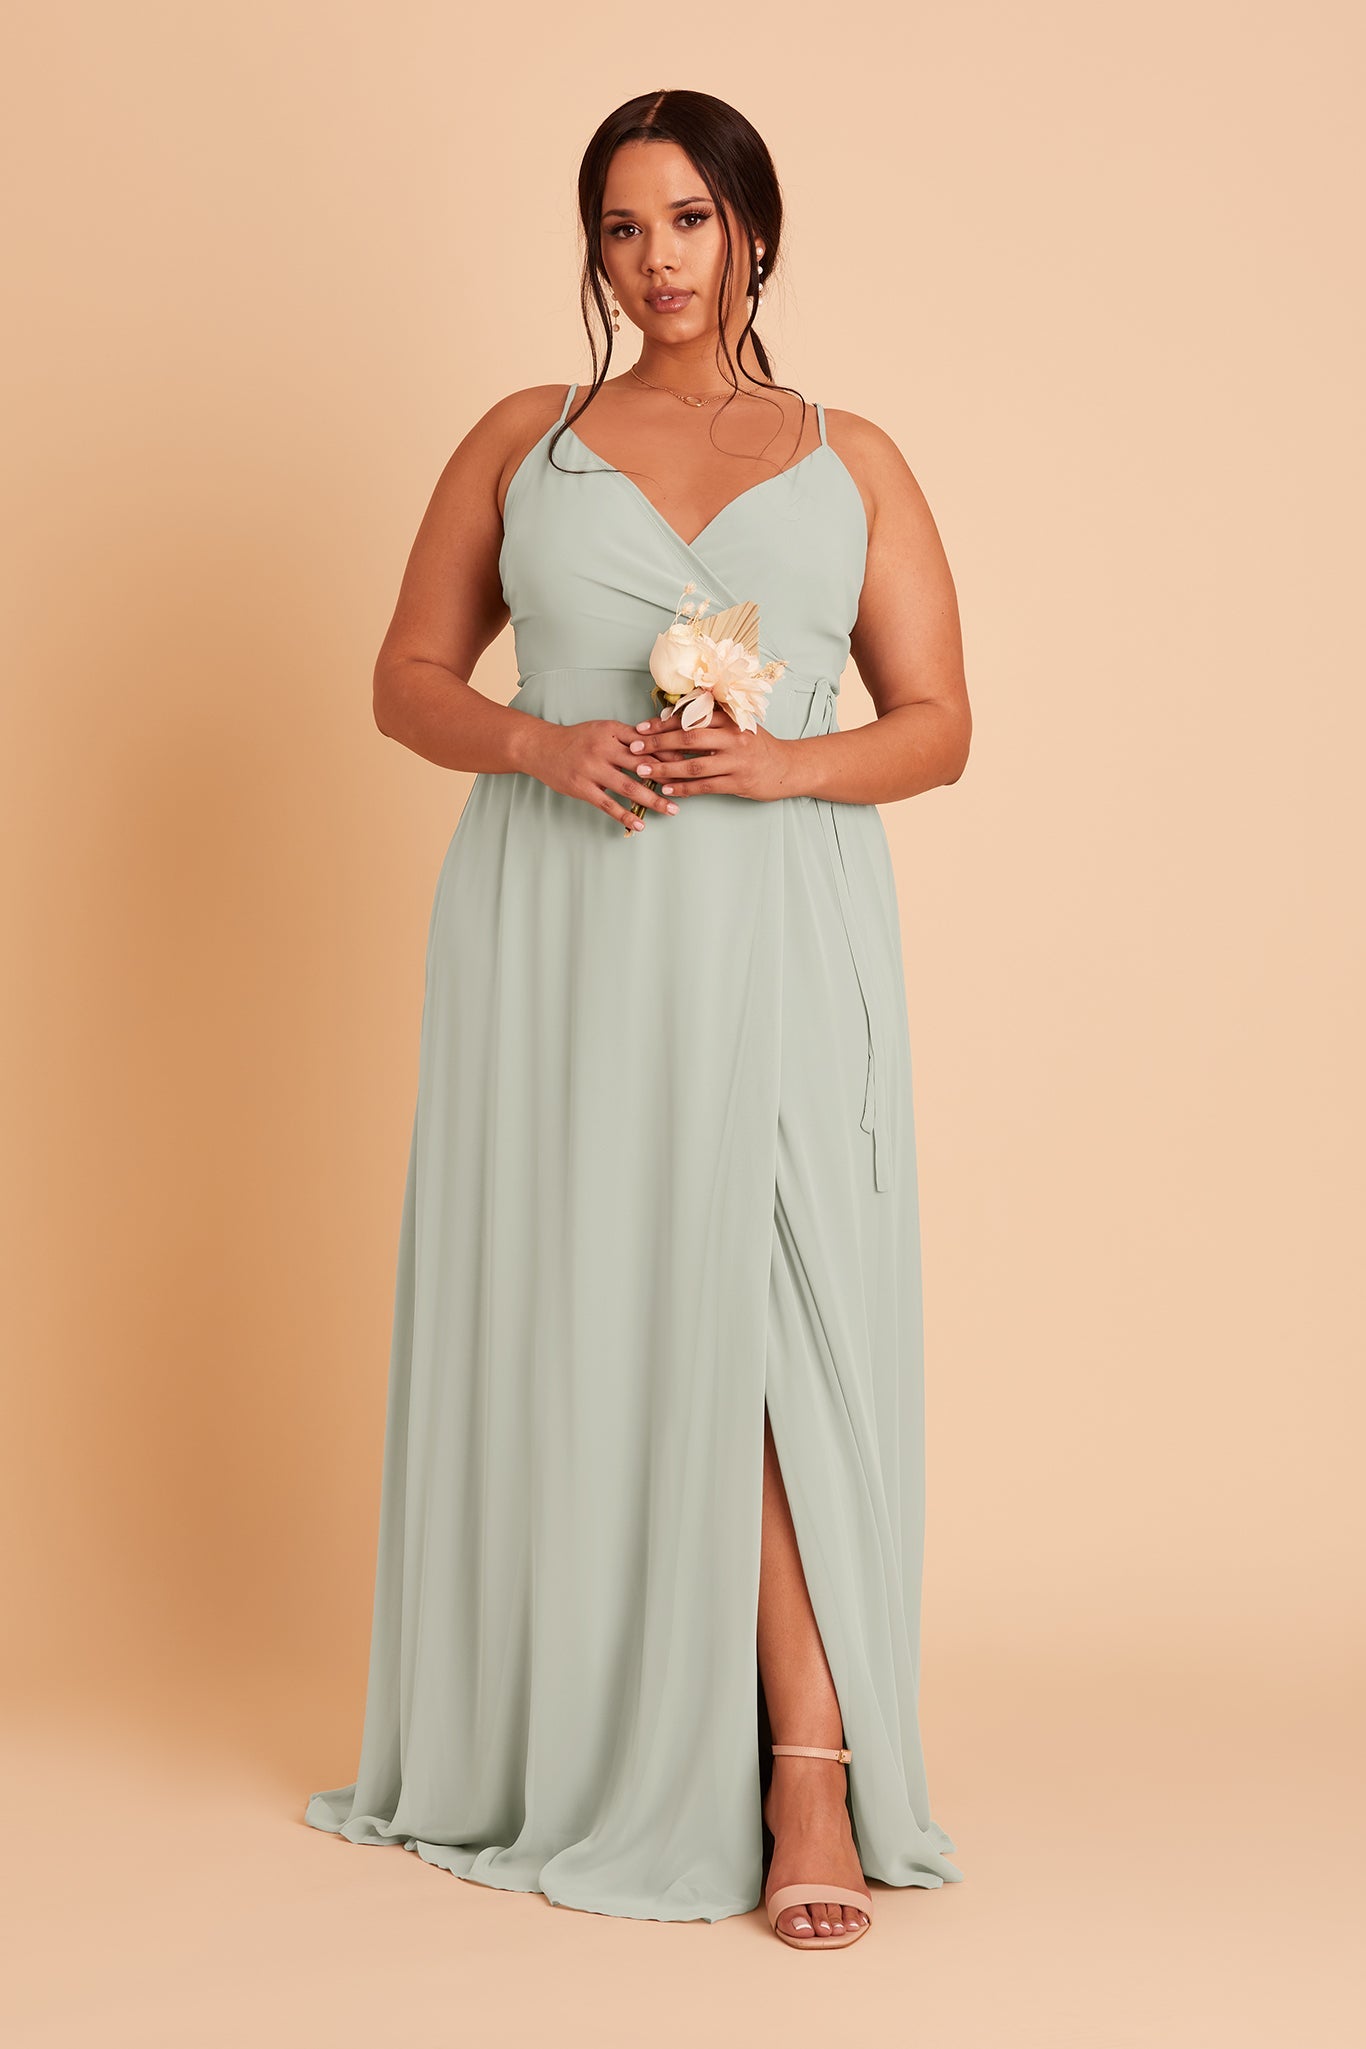 5 Top Summer Formal Dresses: How to Choose the Perfect Style - 87984